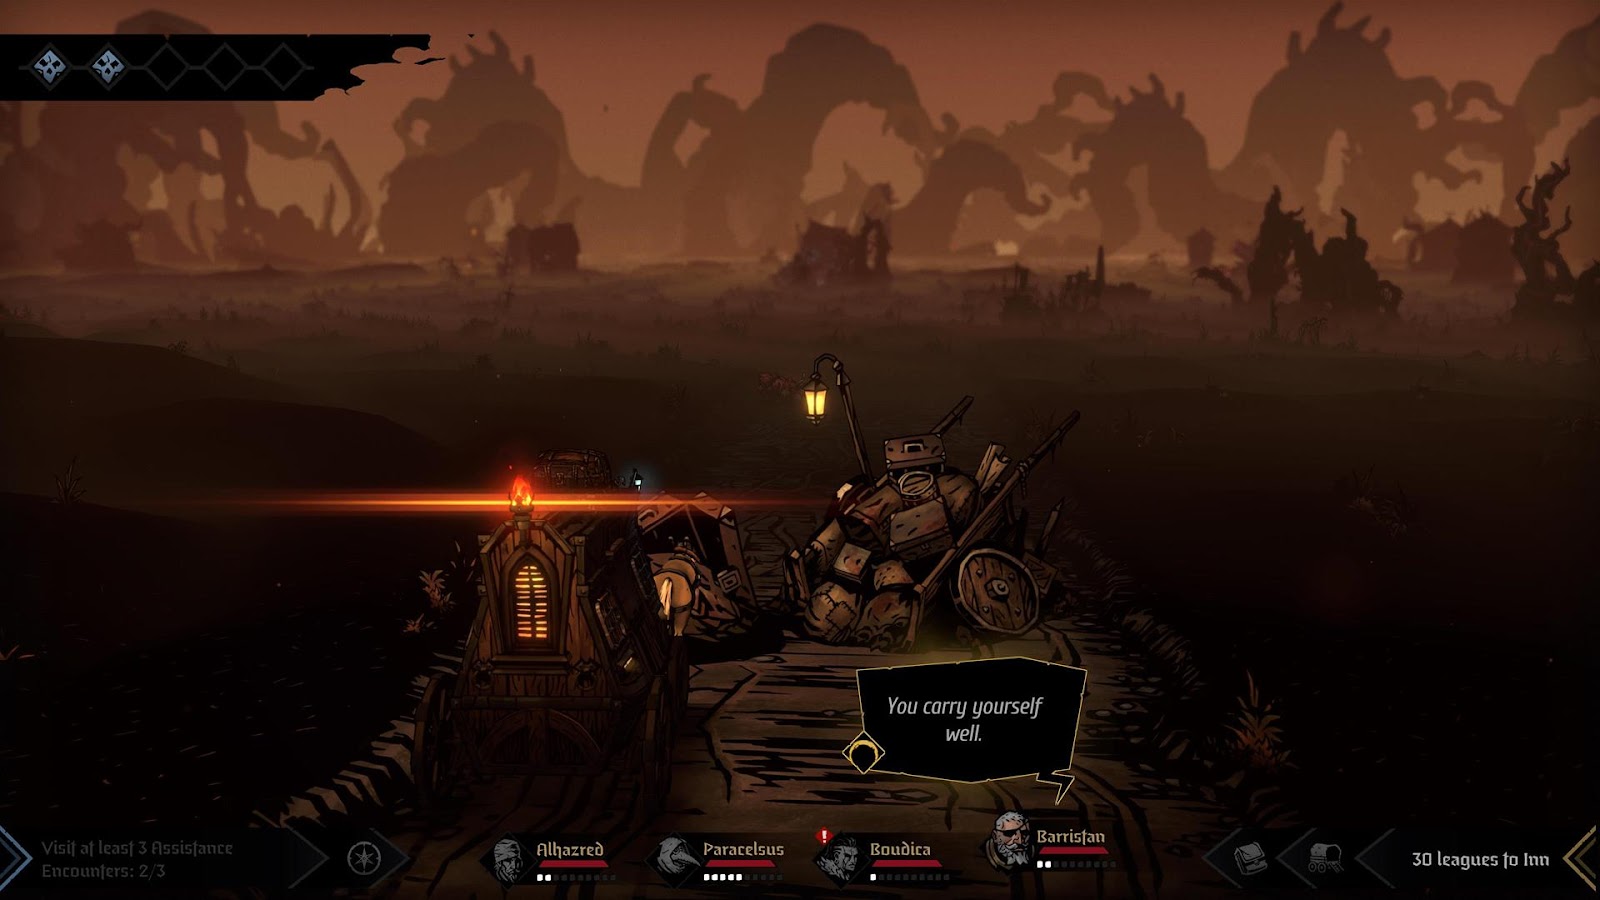 when does darkest dungeon 2 come out